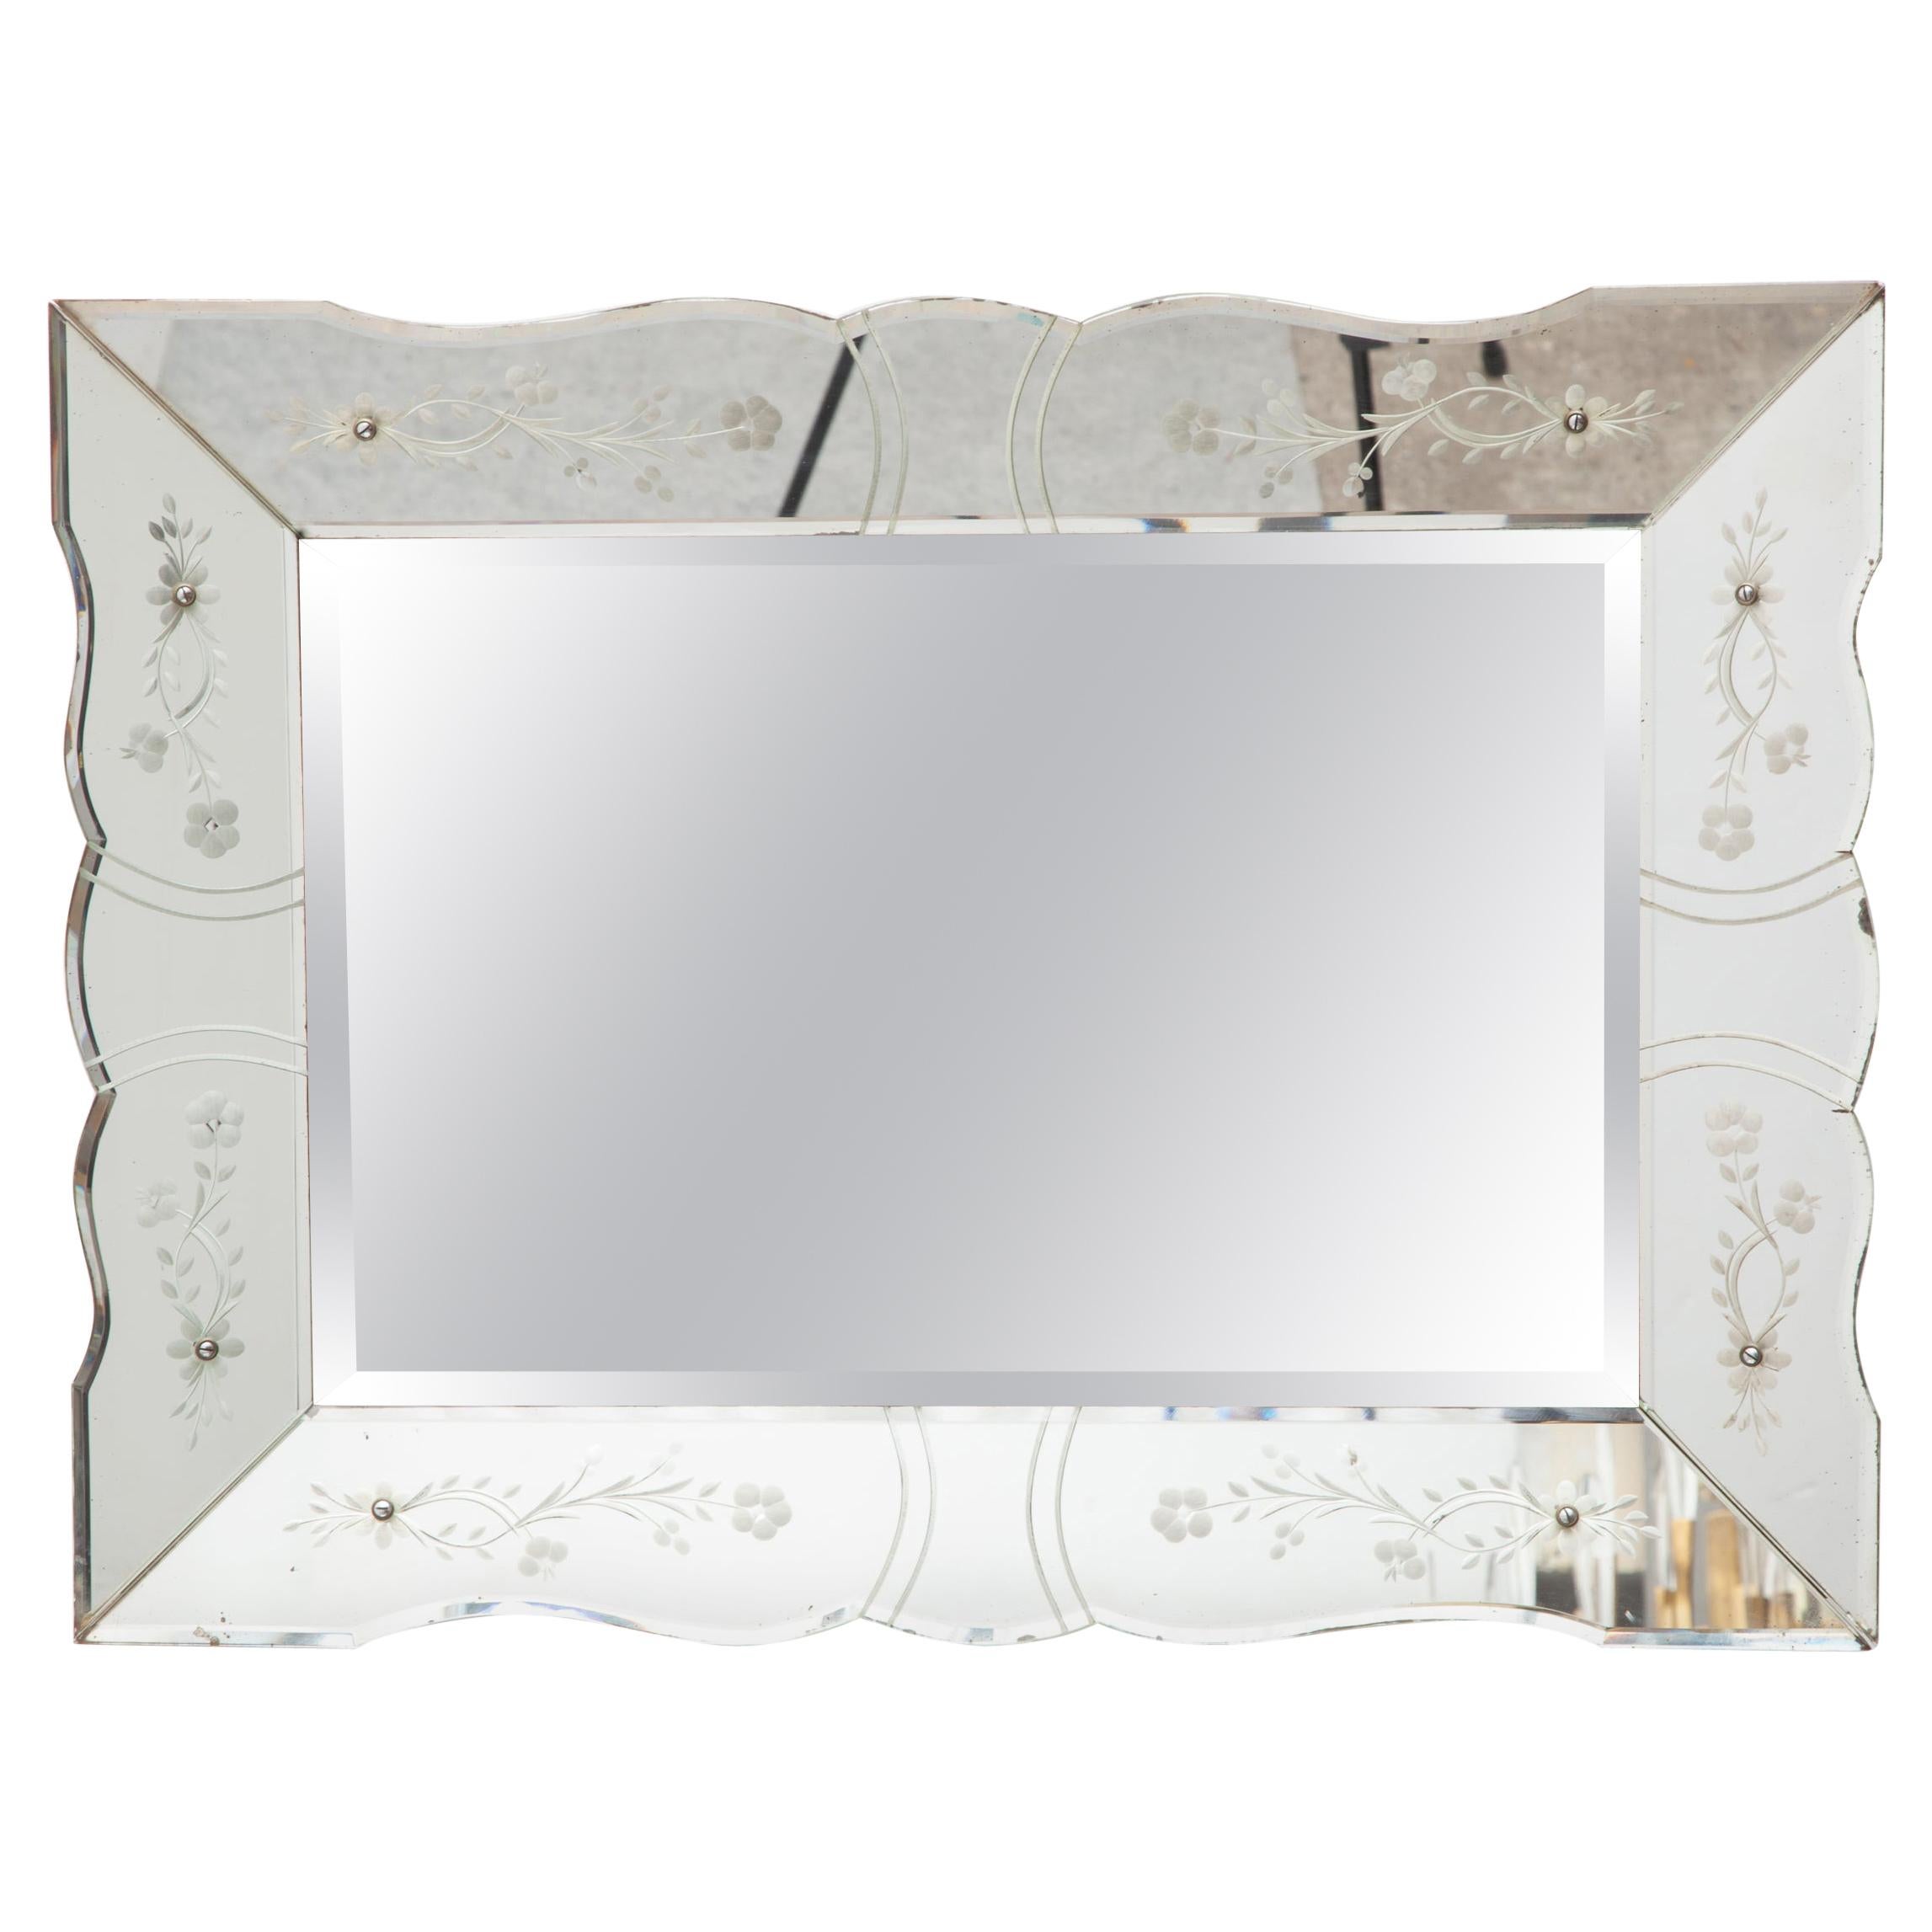 Art Deco Faceted Mirror with Etched Floral Motif